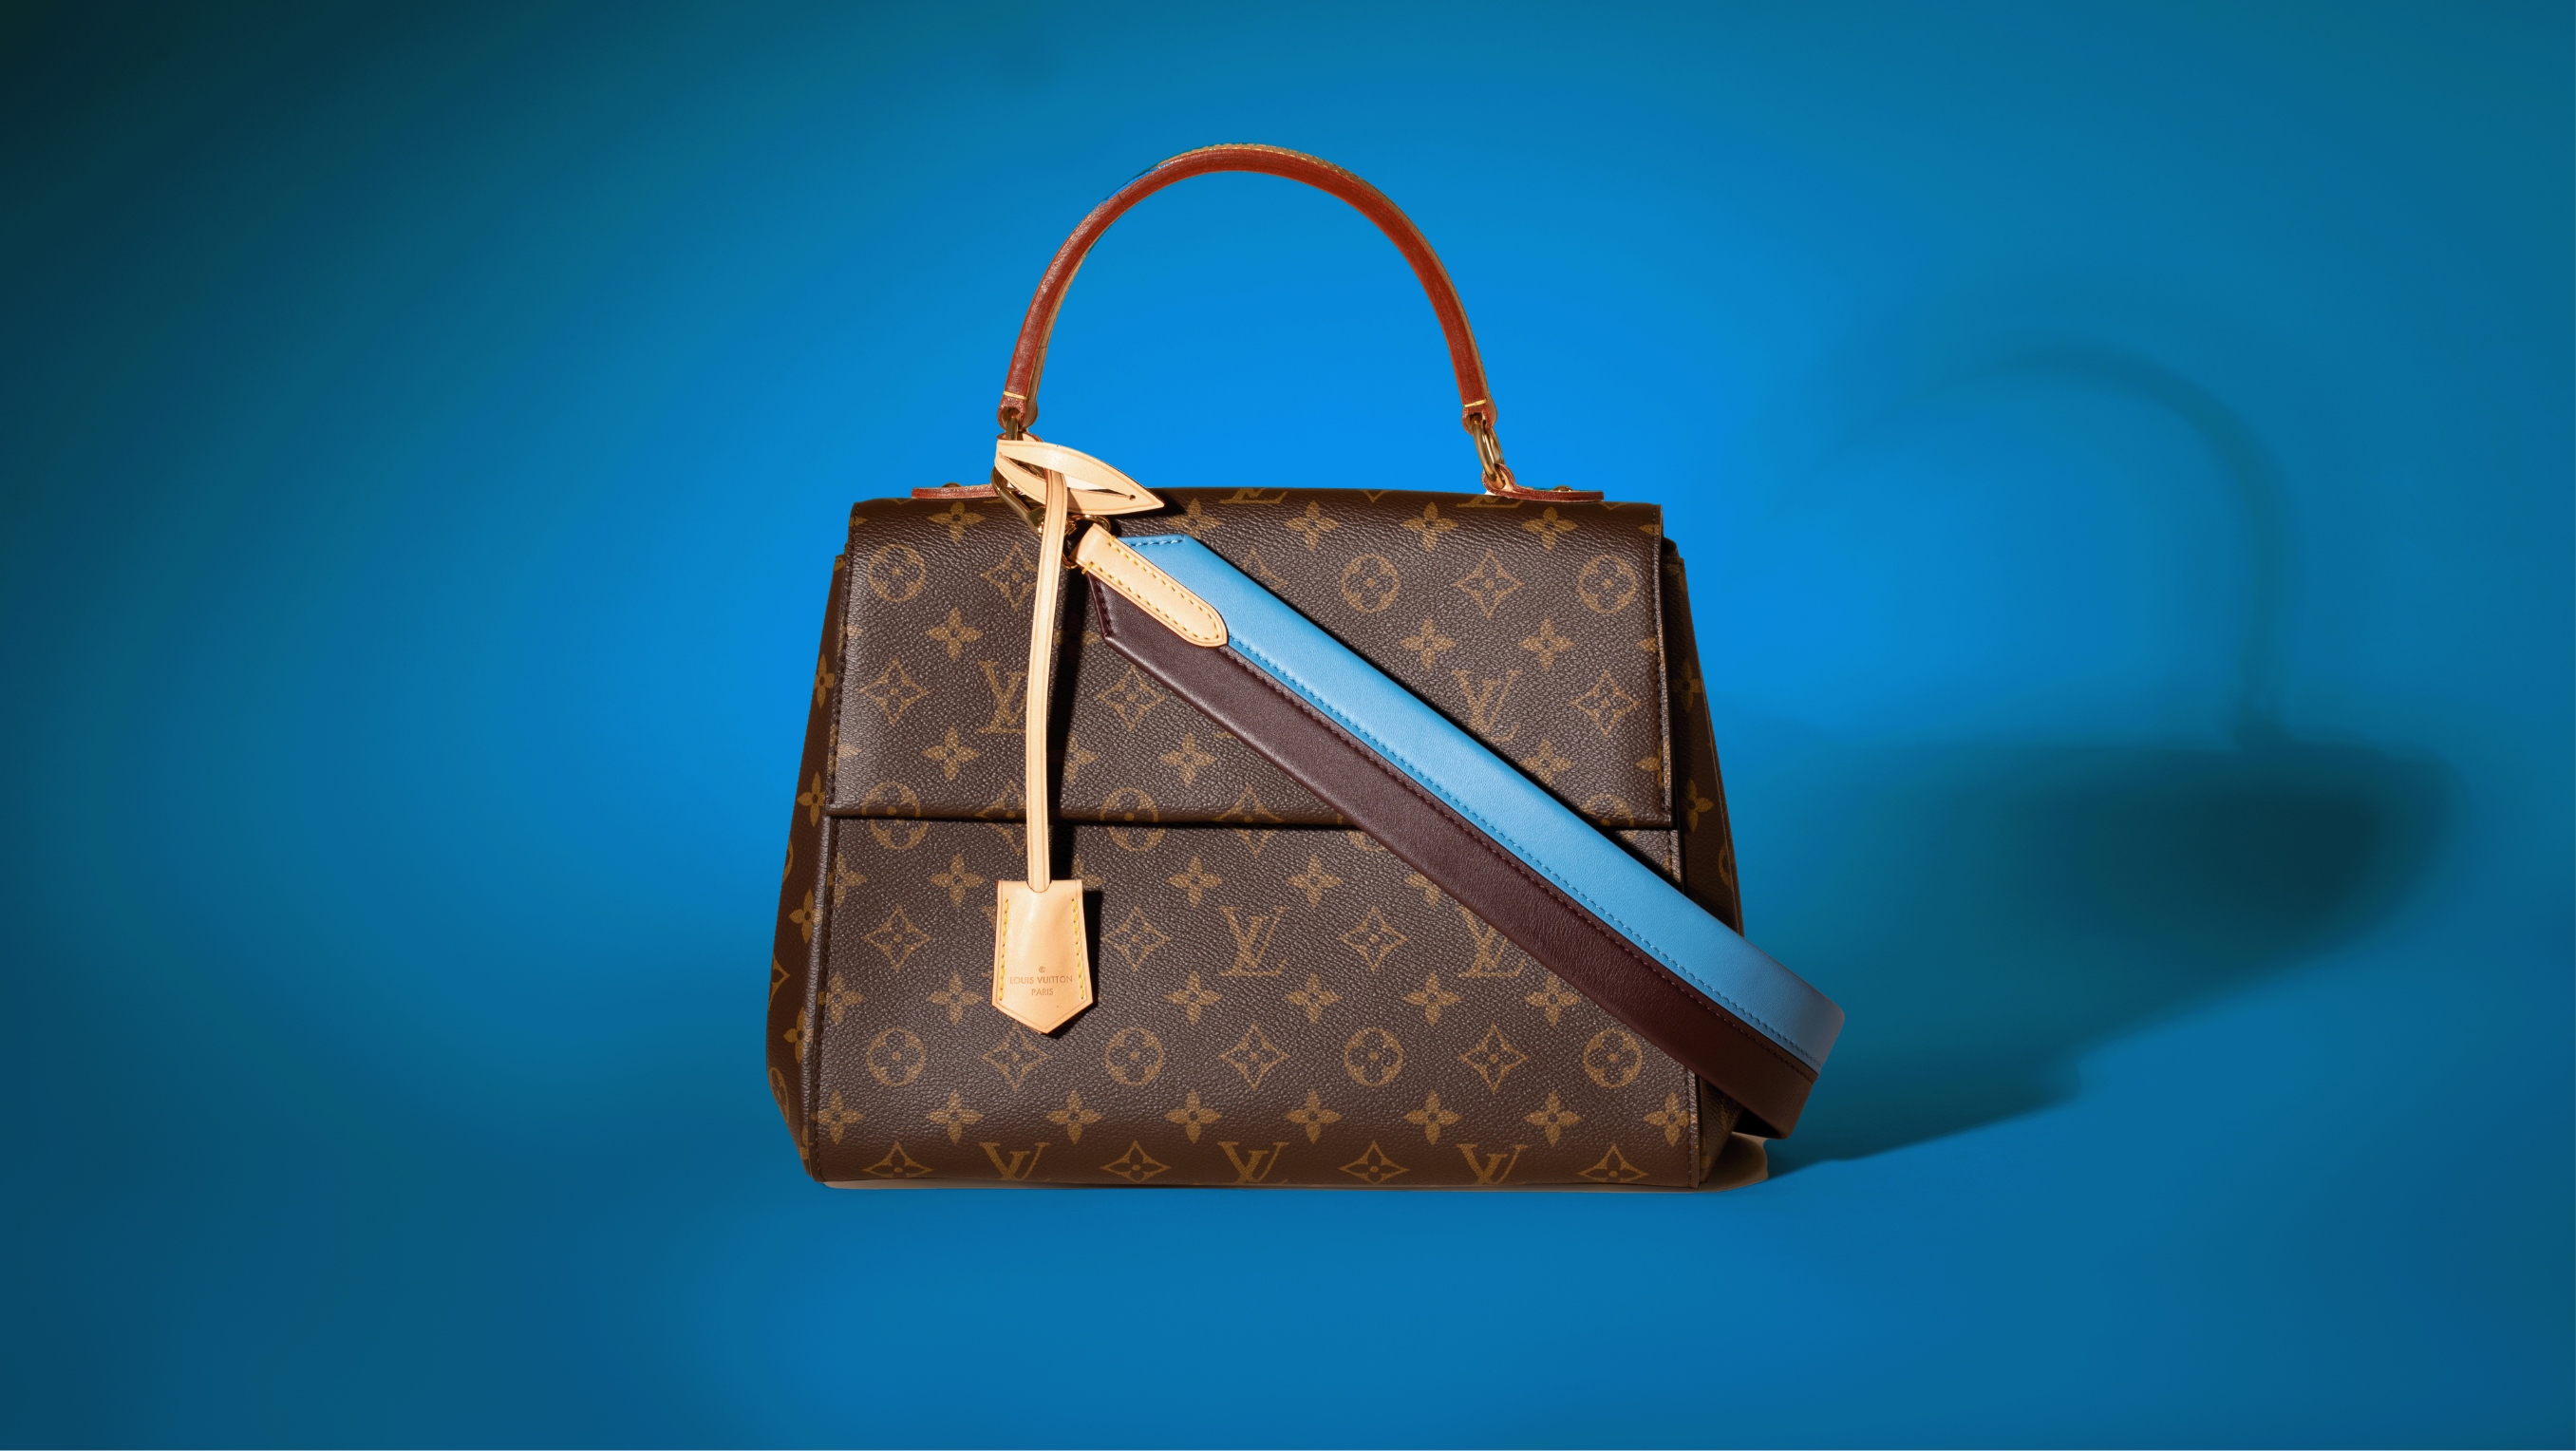 Breaking Handbag News: World's Most Expensive Bag is Now for Sale - PurseBop